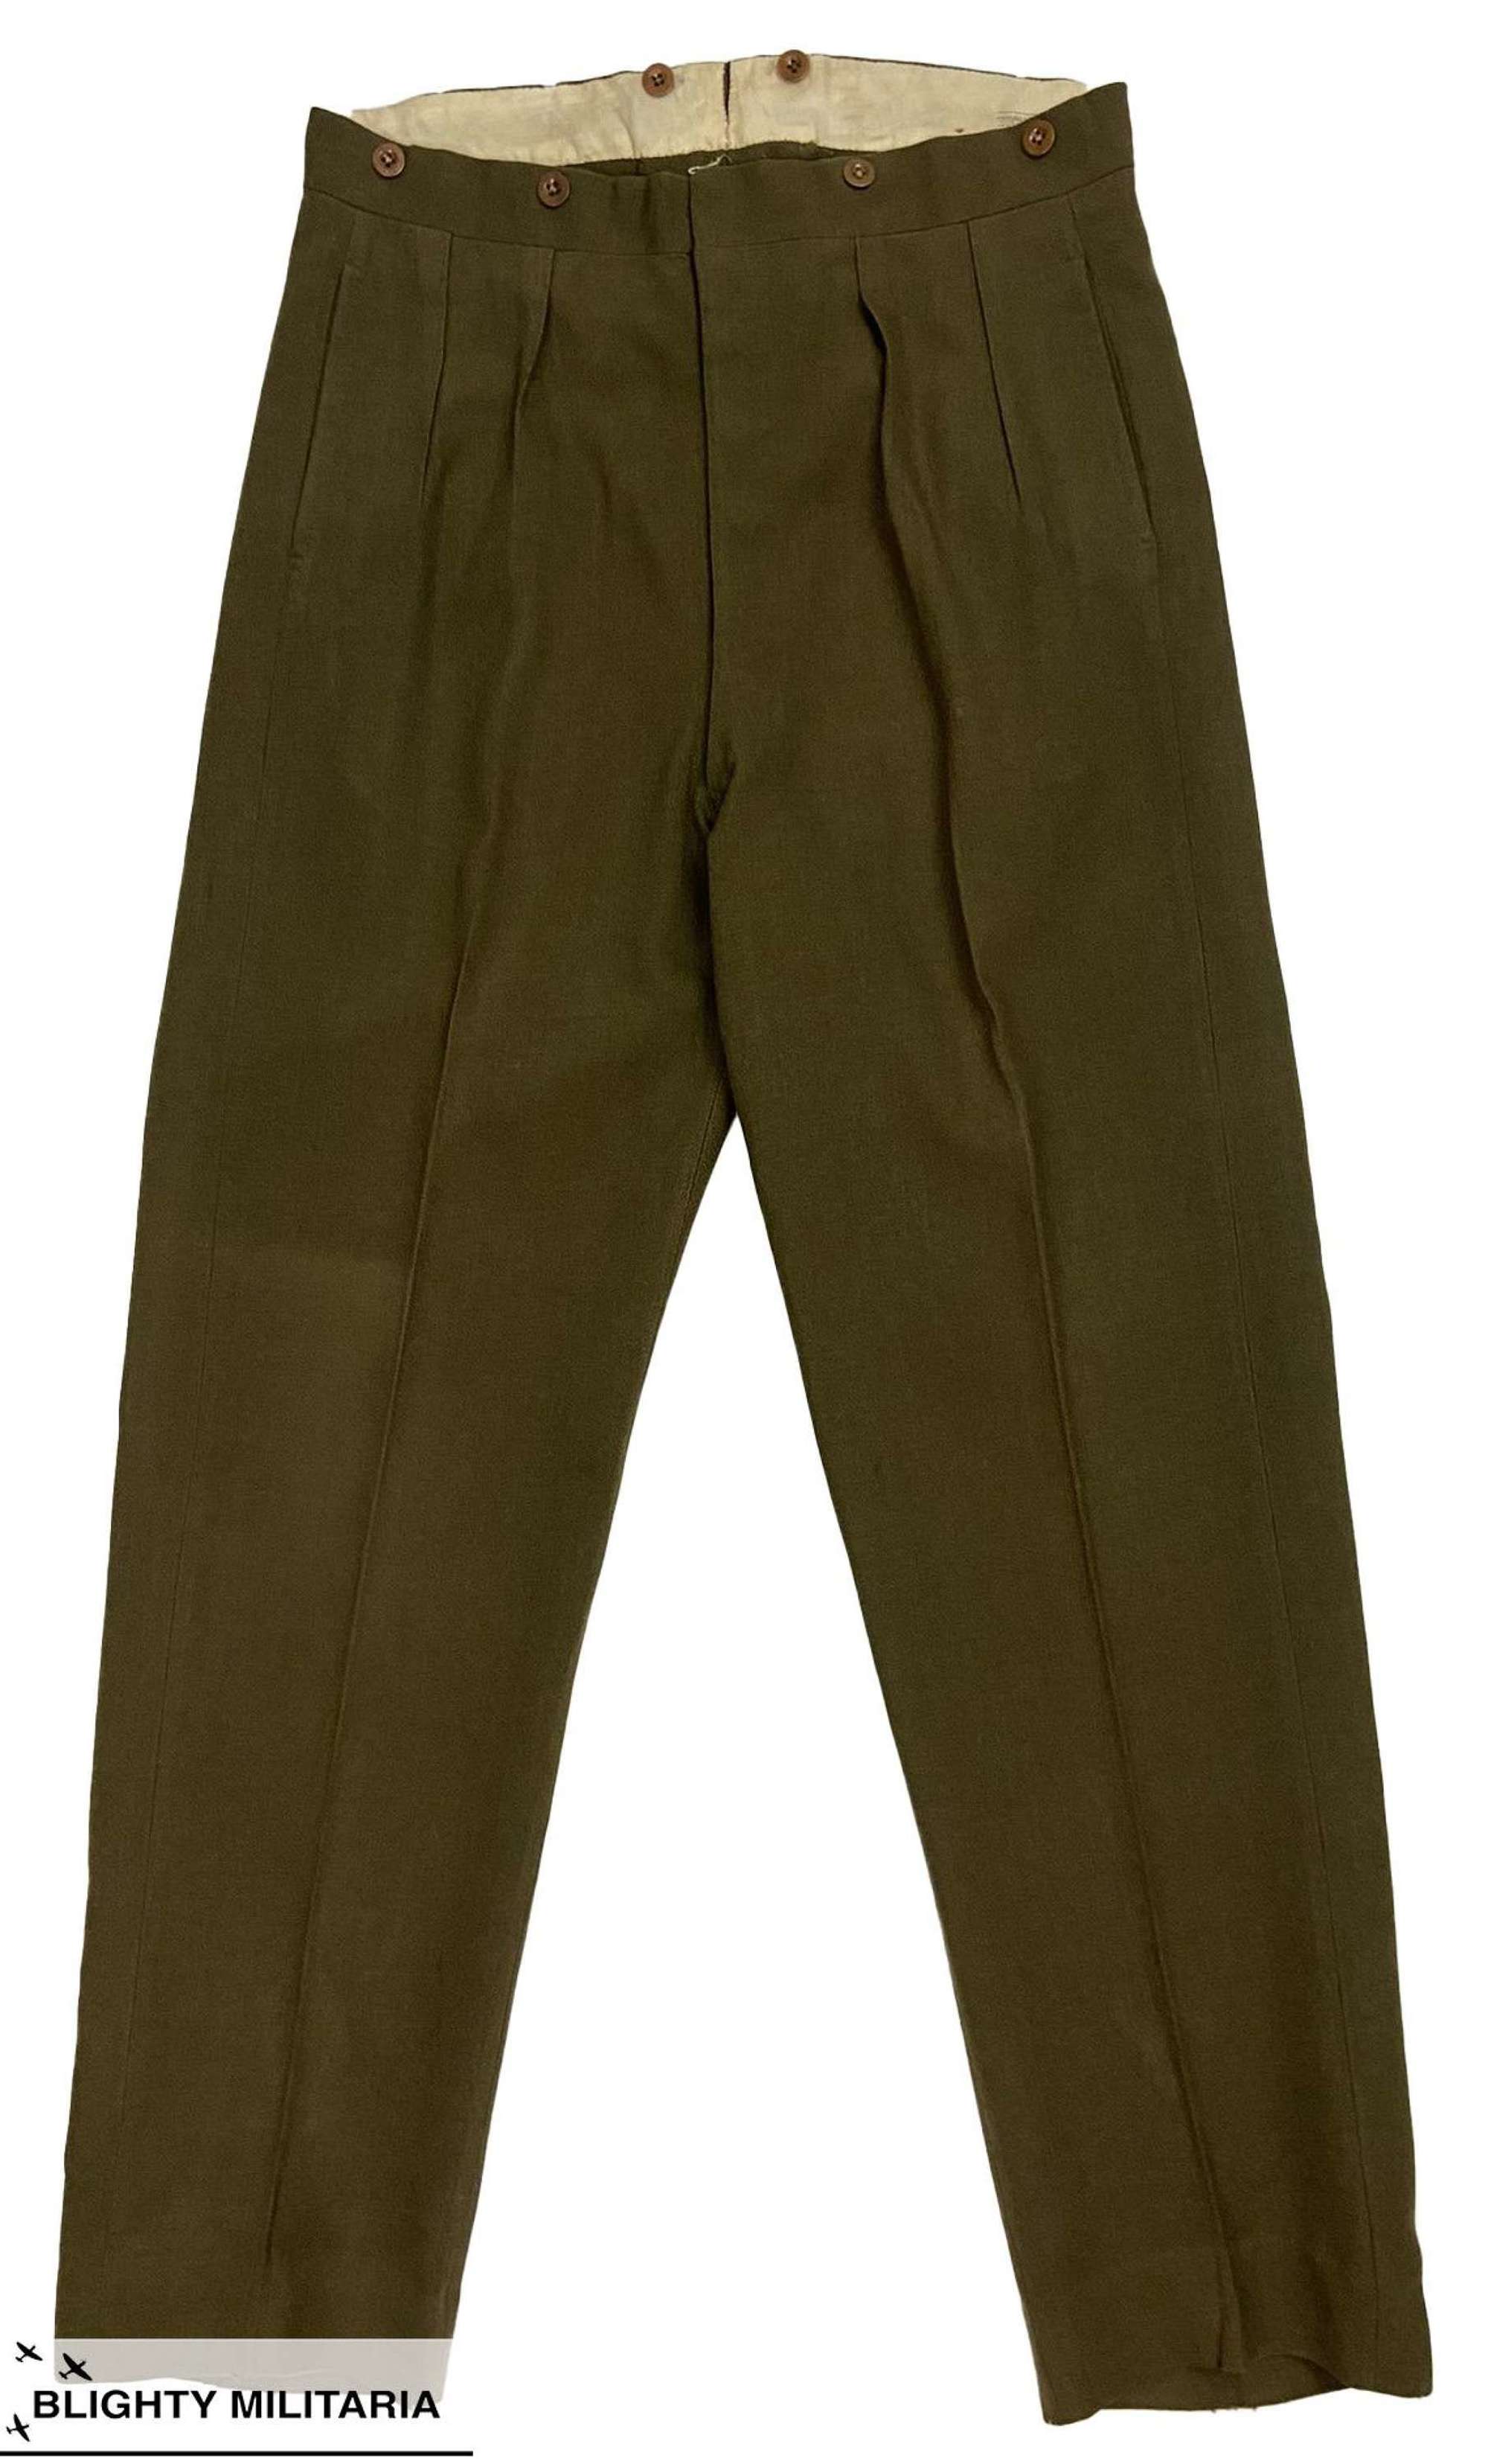 Original 1940s British Army Officer's Service Dress Trousers 35x34